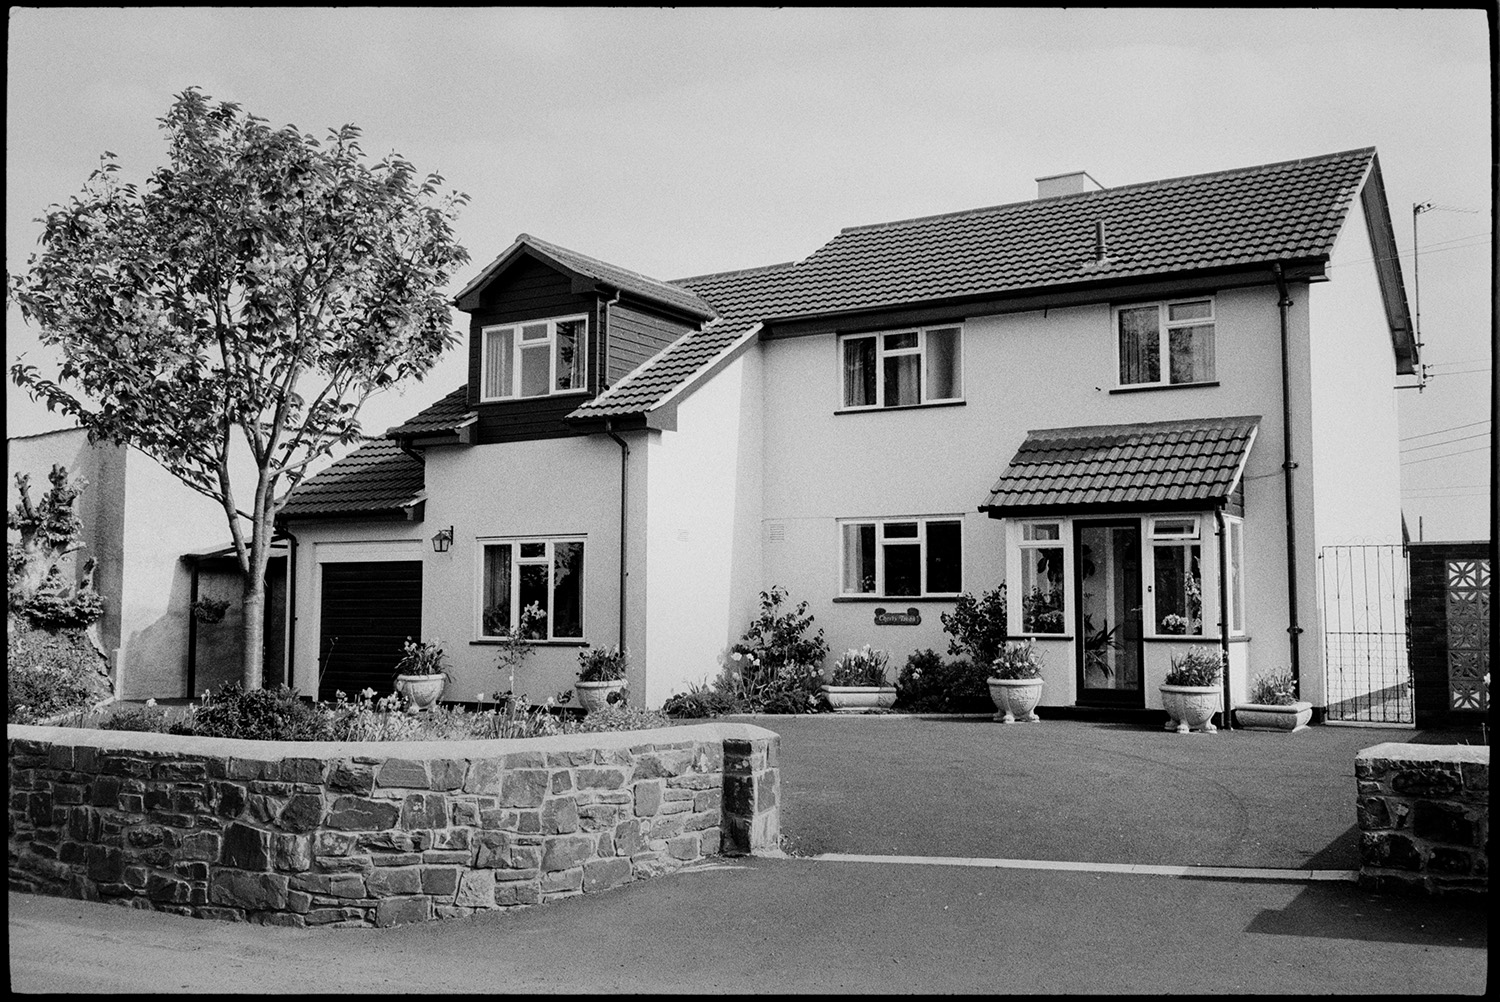 Modern house in village, example of hideous new housing.
[A modern house in Kings Nympton with a garage and tiled roof. Flower pots are in front of the house on the driveway.]